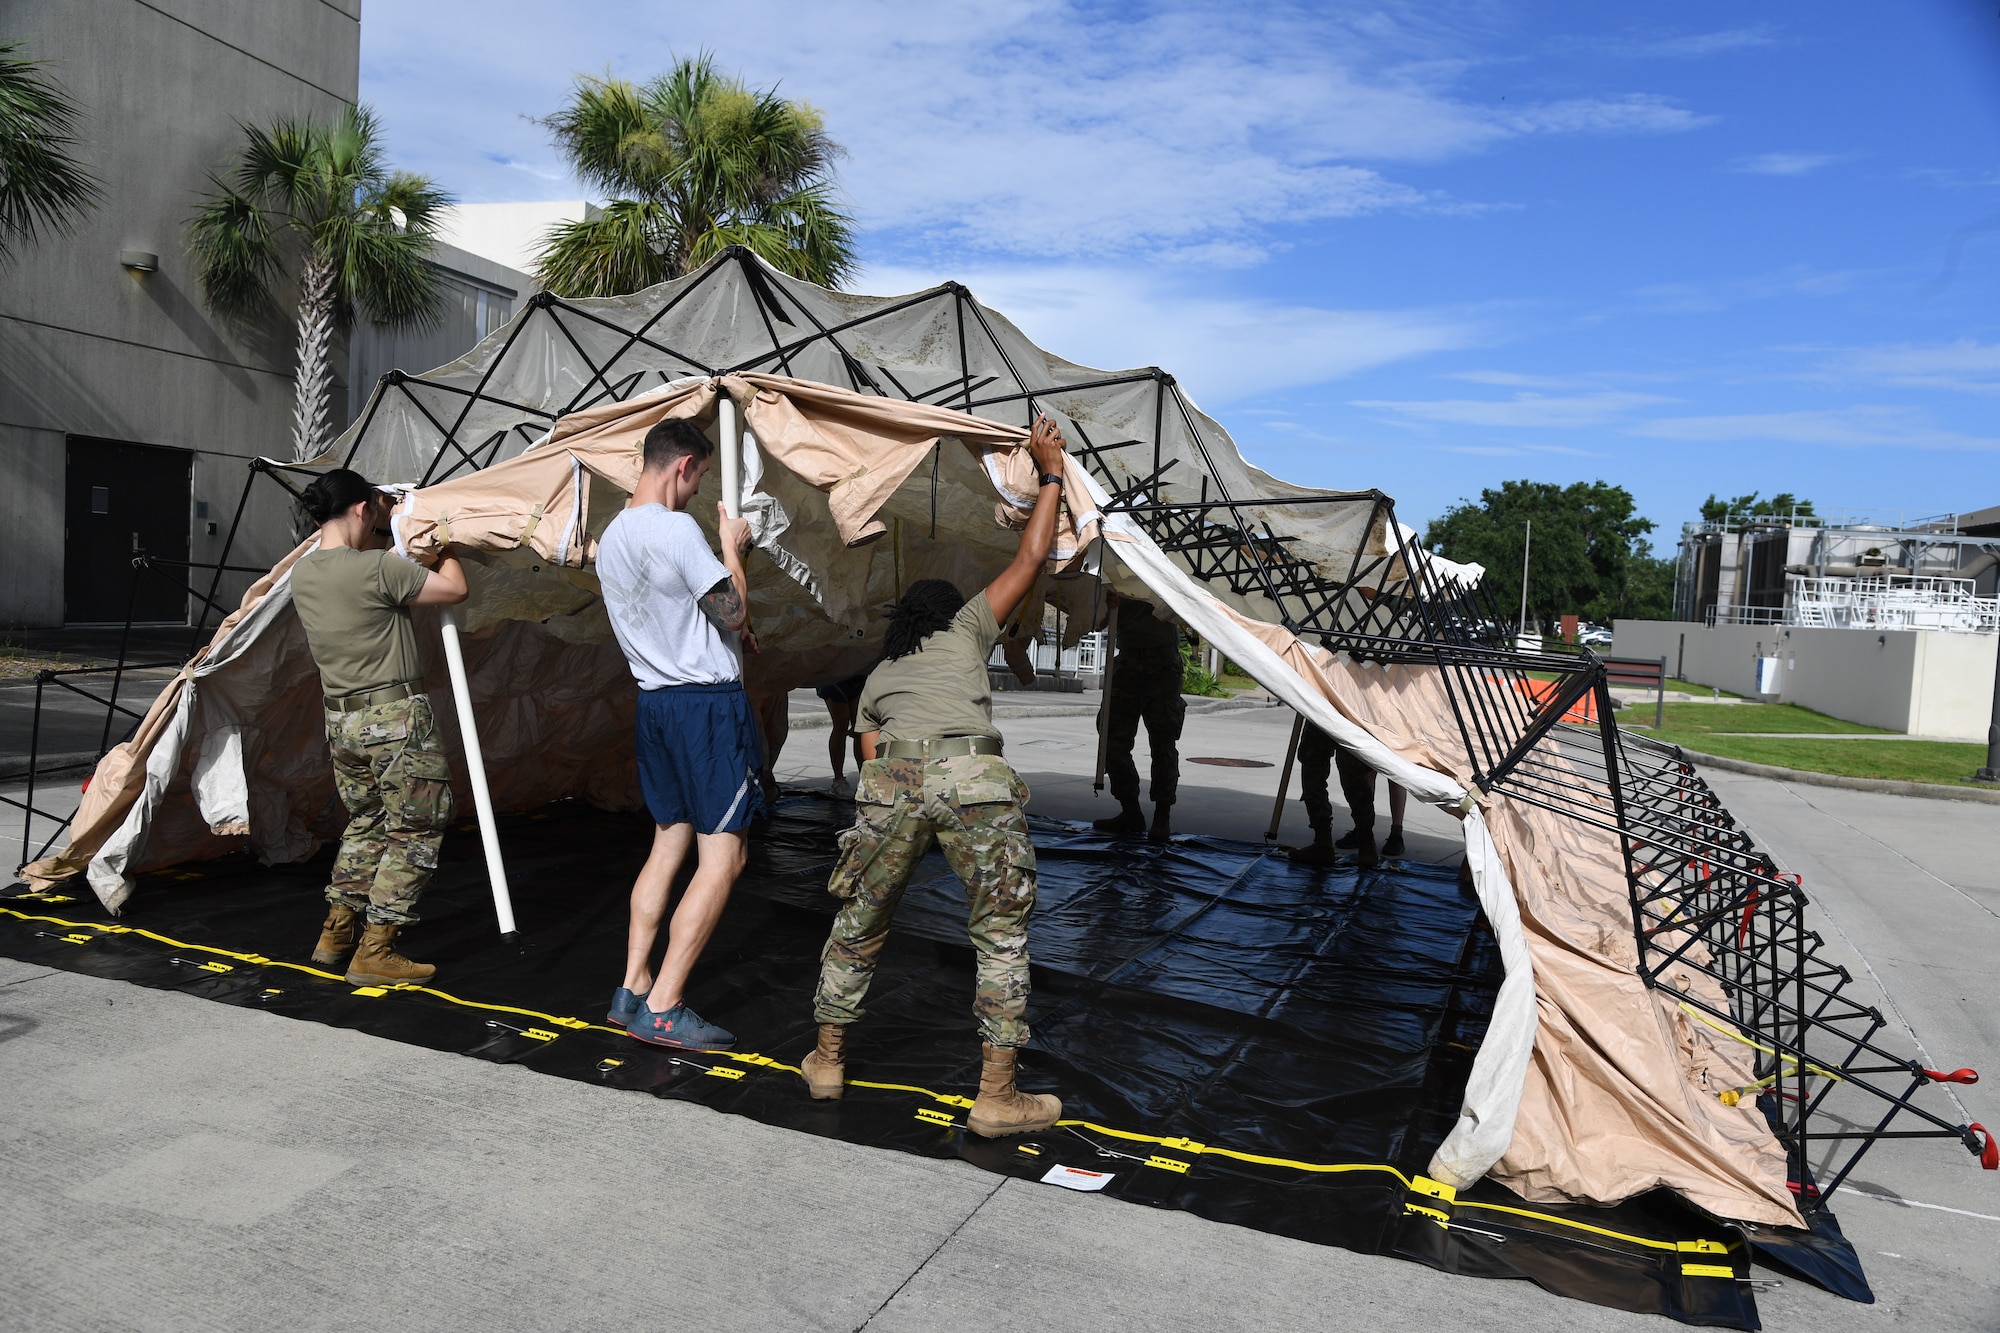 Members of the 81st Medical Group assemble a decontamination tent during an 81st MDG functional exercise behind the Keesler Medical Center at Keesler Air Force Base, Mississippi, July 15, 2021. The scenario involved a chlorine cylinder explosion causing chemical burns and other injuries on several victims. The mass casualty exercise was held to prepare for real-world events by strengthening disaster medical response capabilities. (U.S. Air Force photo by Kemberly Groue)